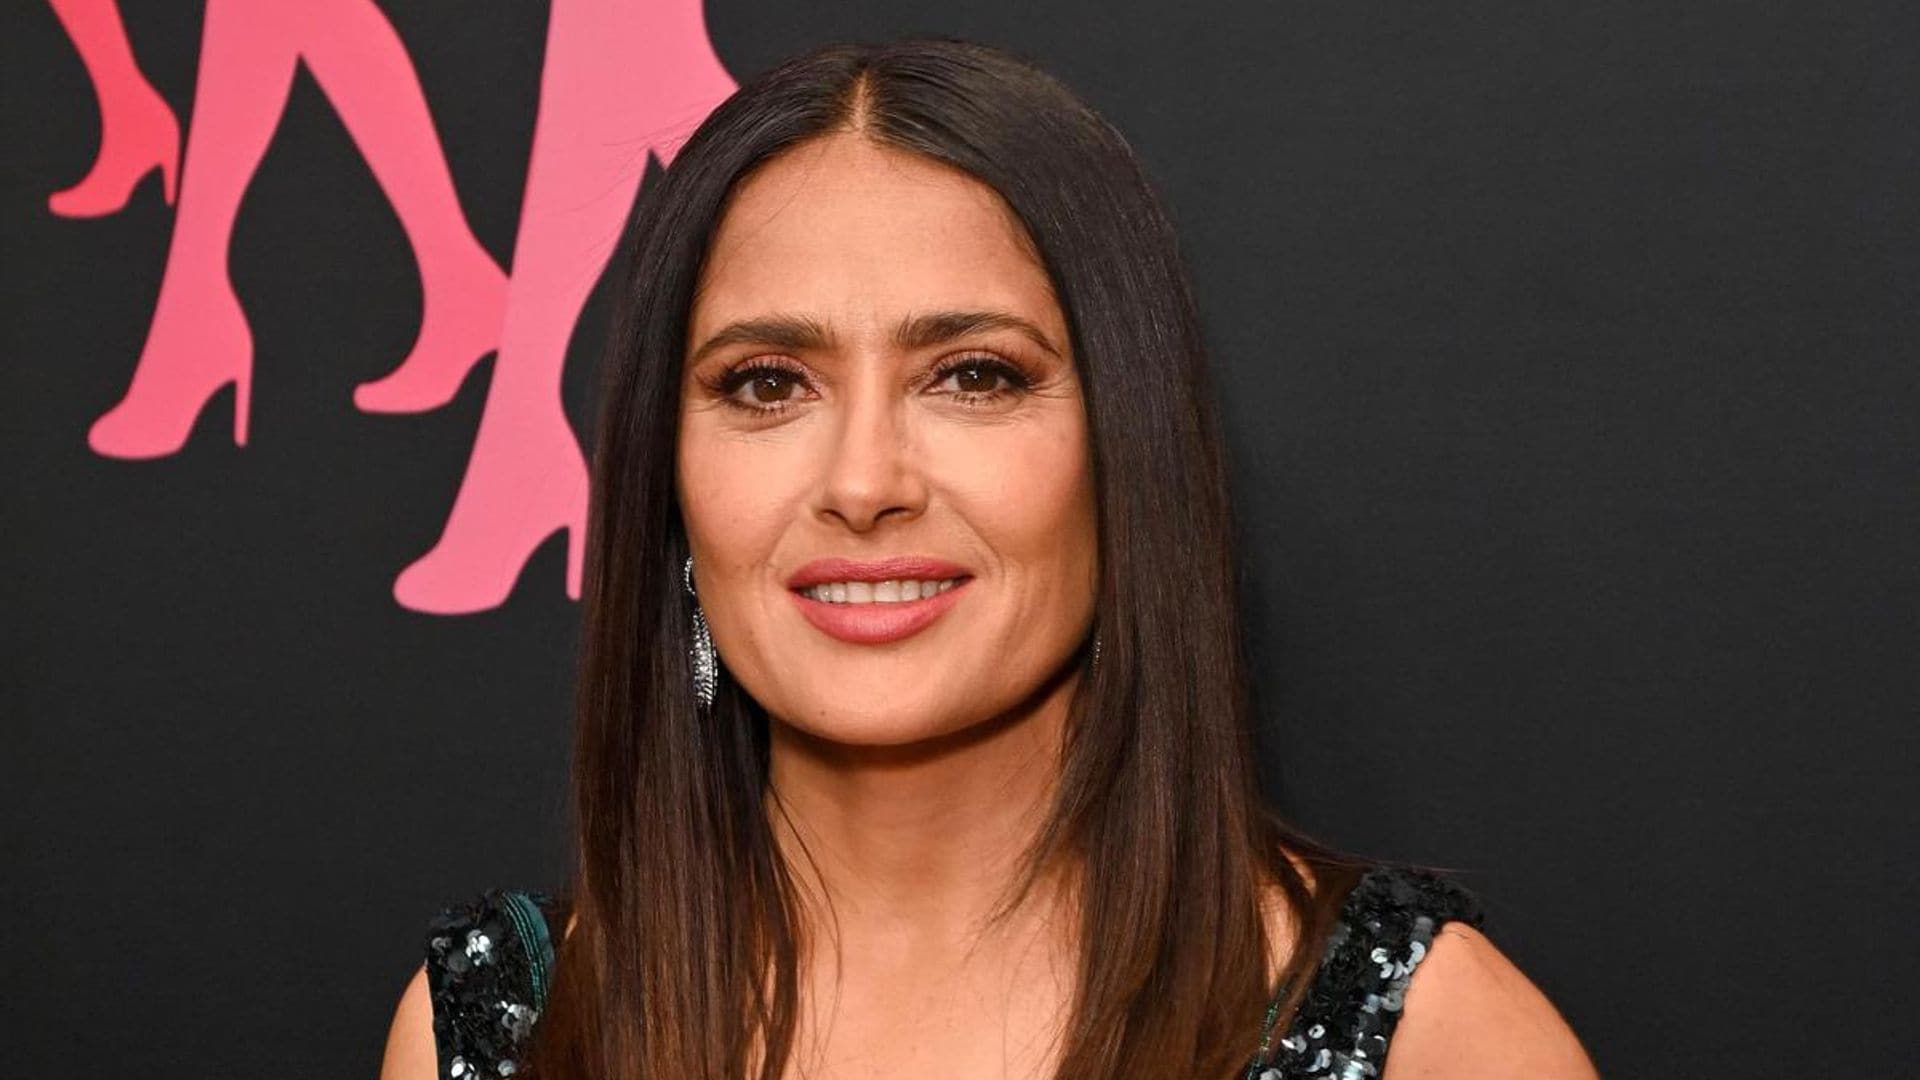 Salma Hayek refuses to star in another TV show to focus on her daughter Valentina